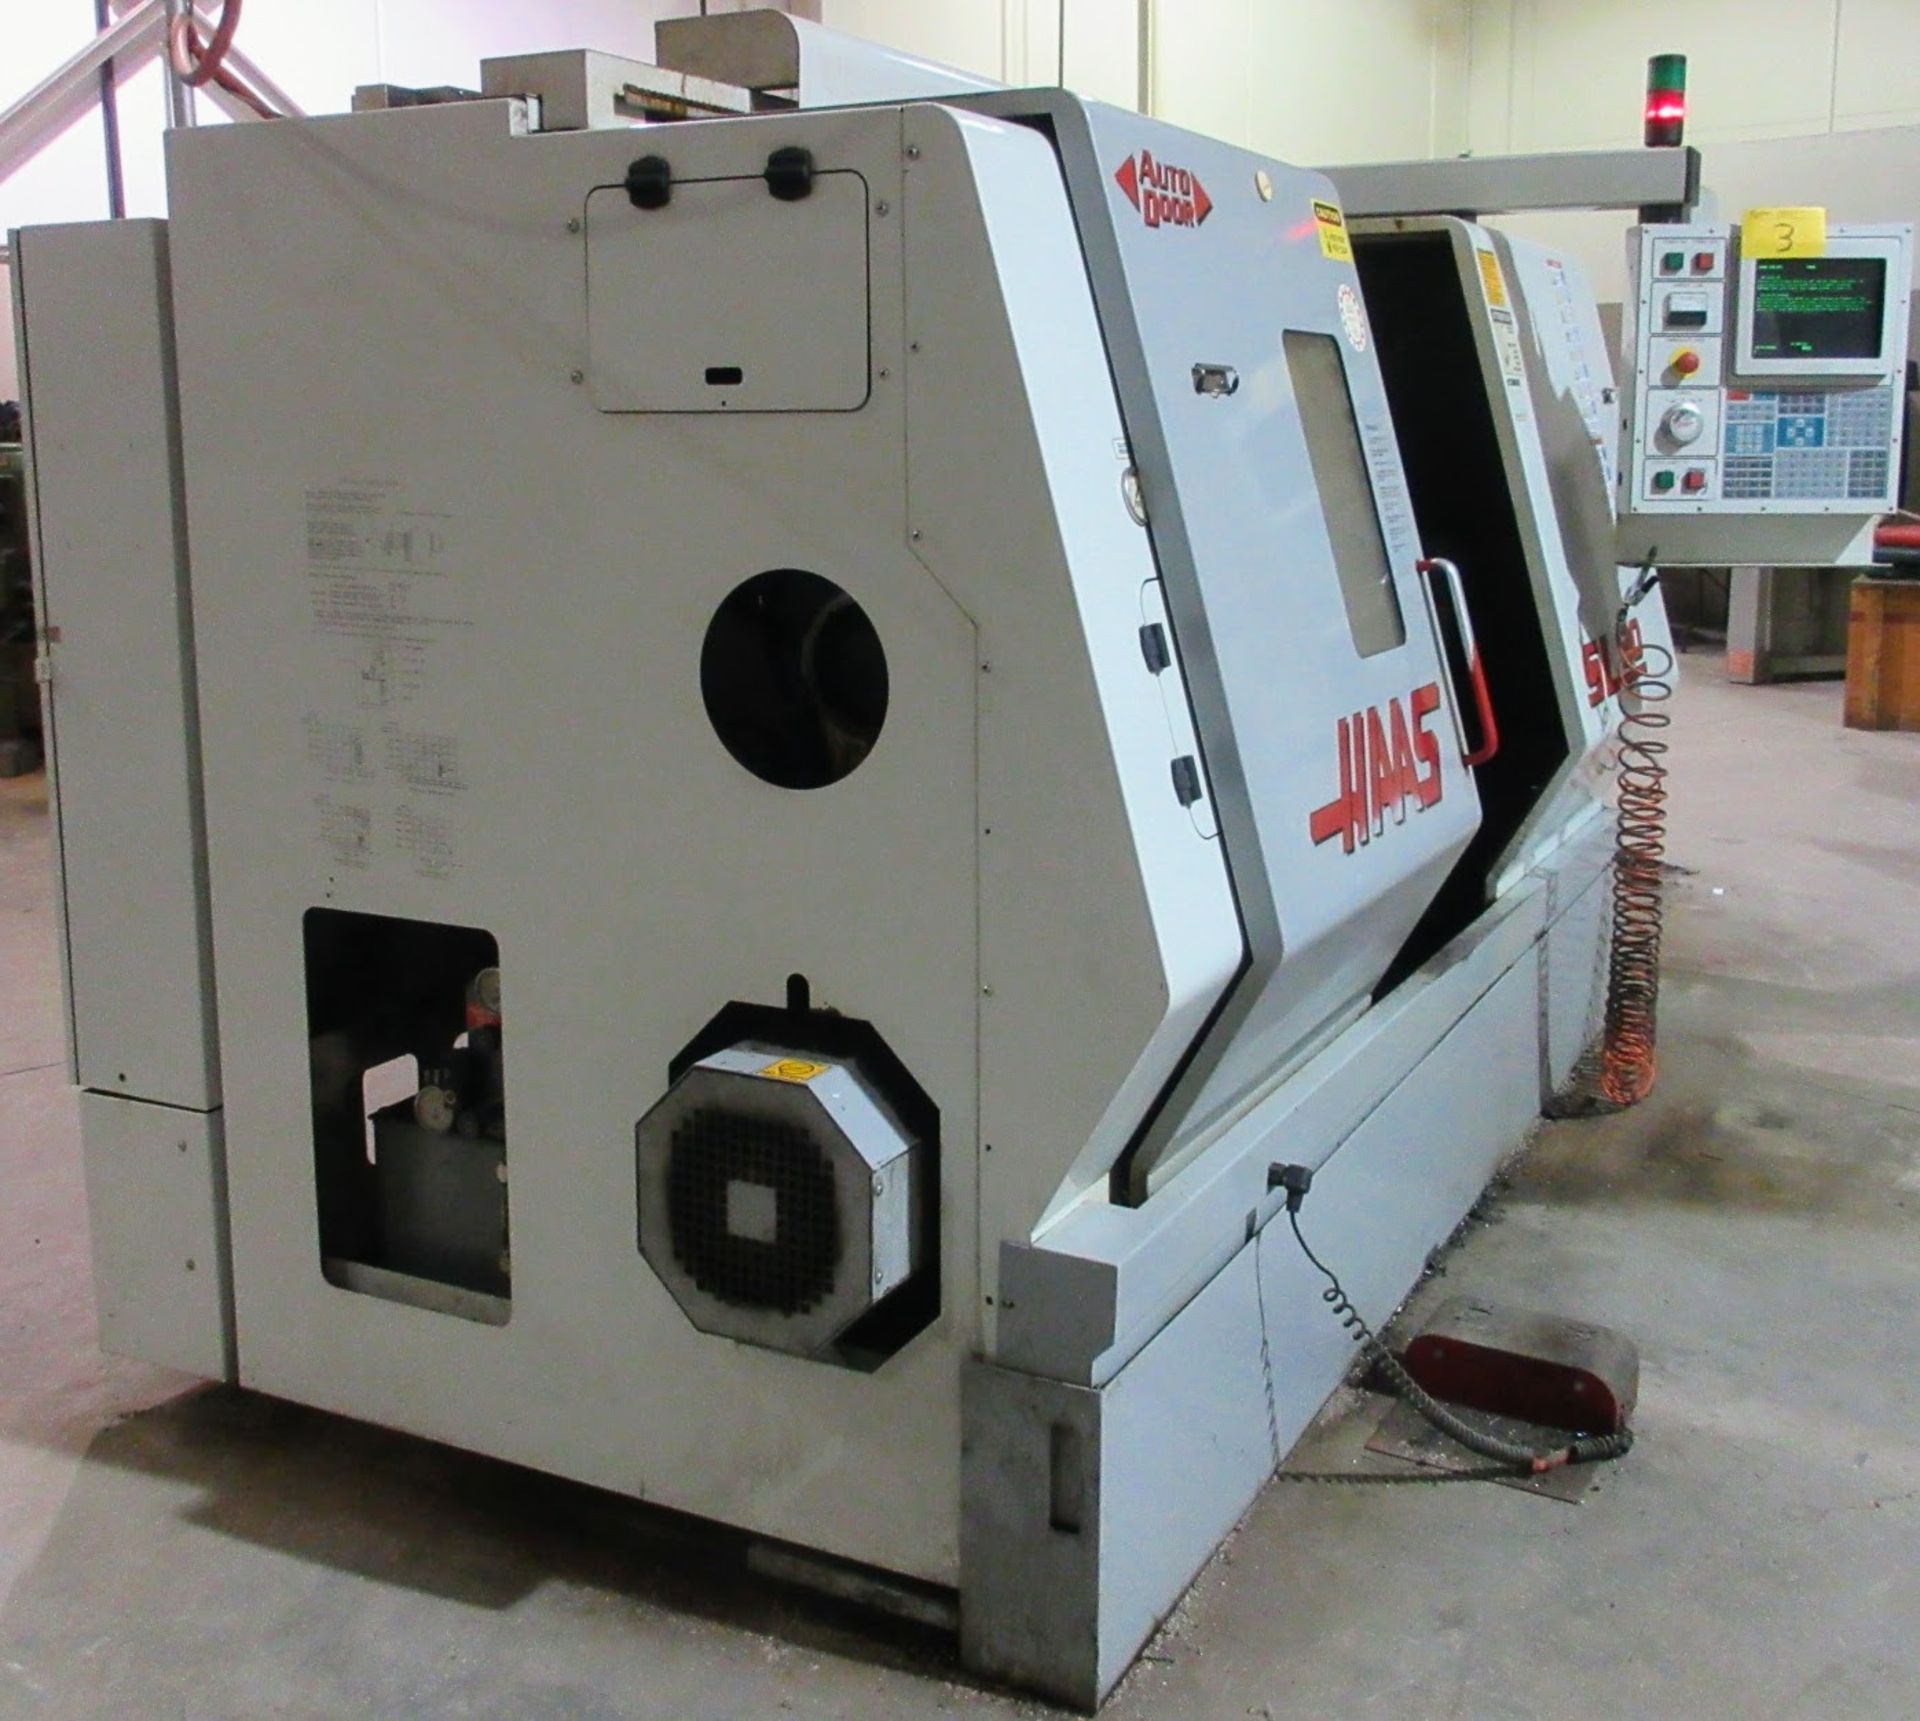 2000 HAAS SL-30T CNC LATHE, S/N 62806, CNC CONTROL, 10” 3-JAW CHUCK, TOOL PRESETTER, 12-STATION - Image 22 of 23